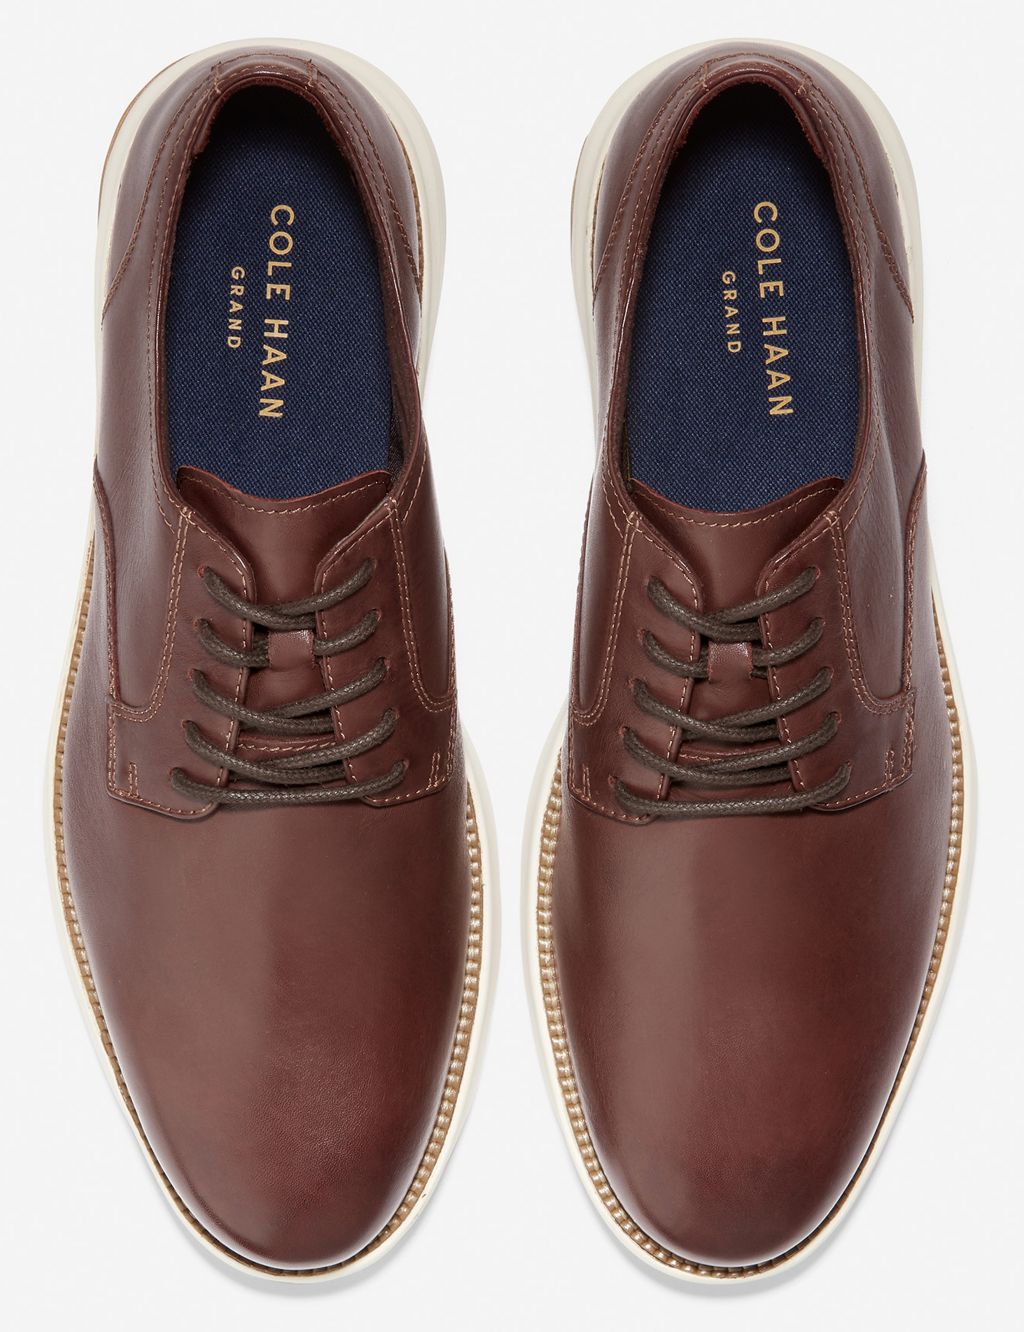 Grand Atlantic Leather Oxford Shoes image 4